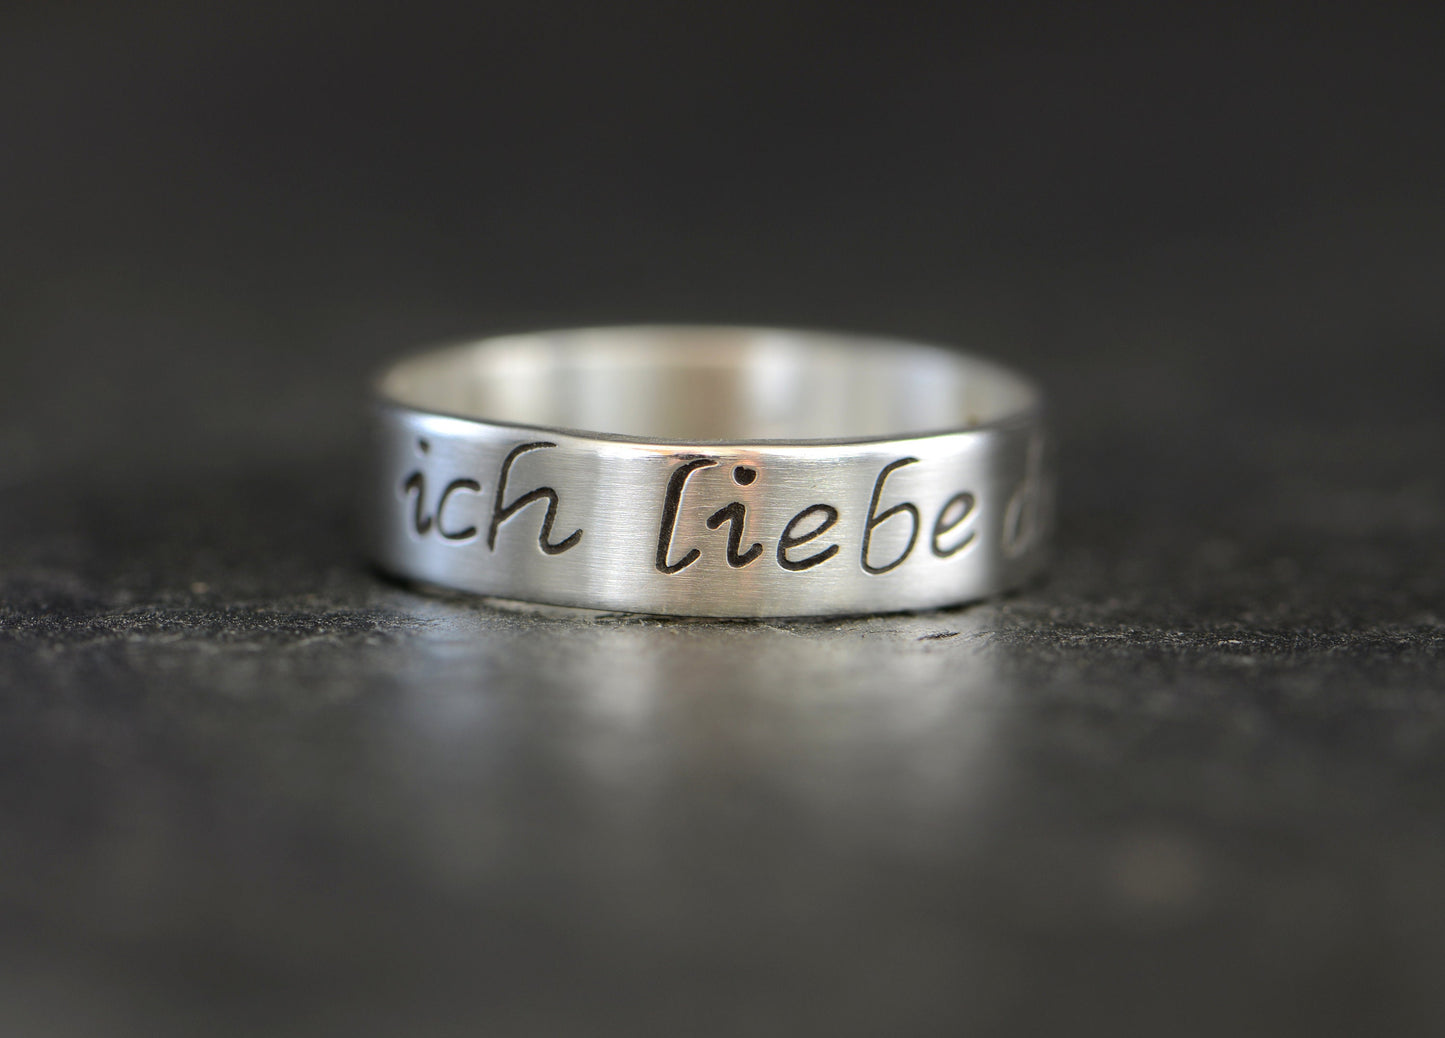 Ich Liebe Dich Sterling Silver Ring  “I love you” in German